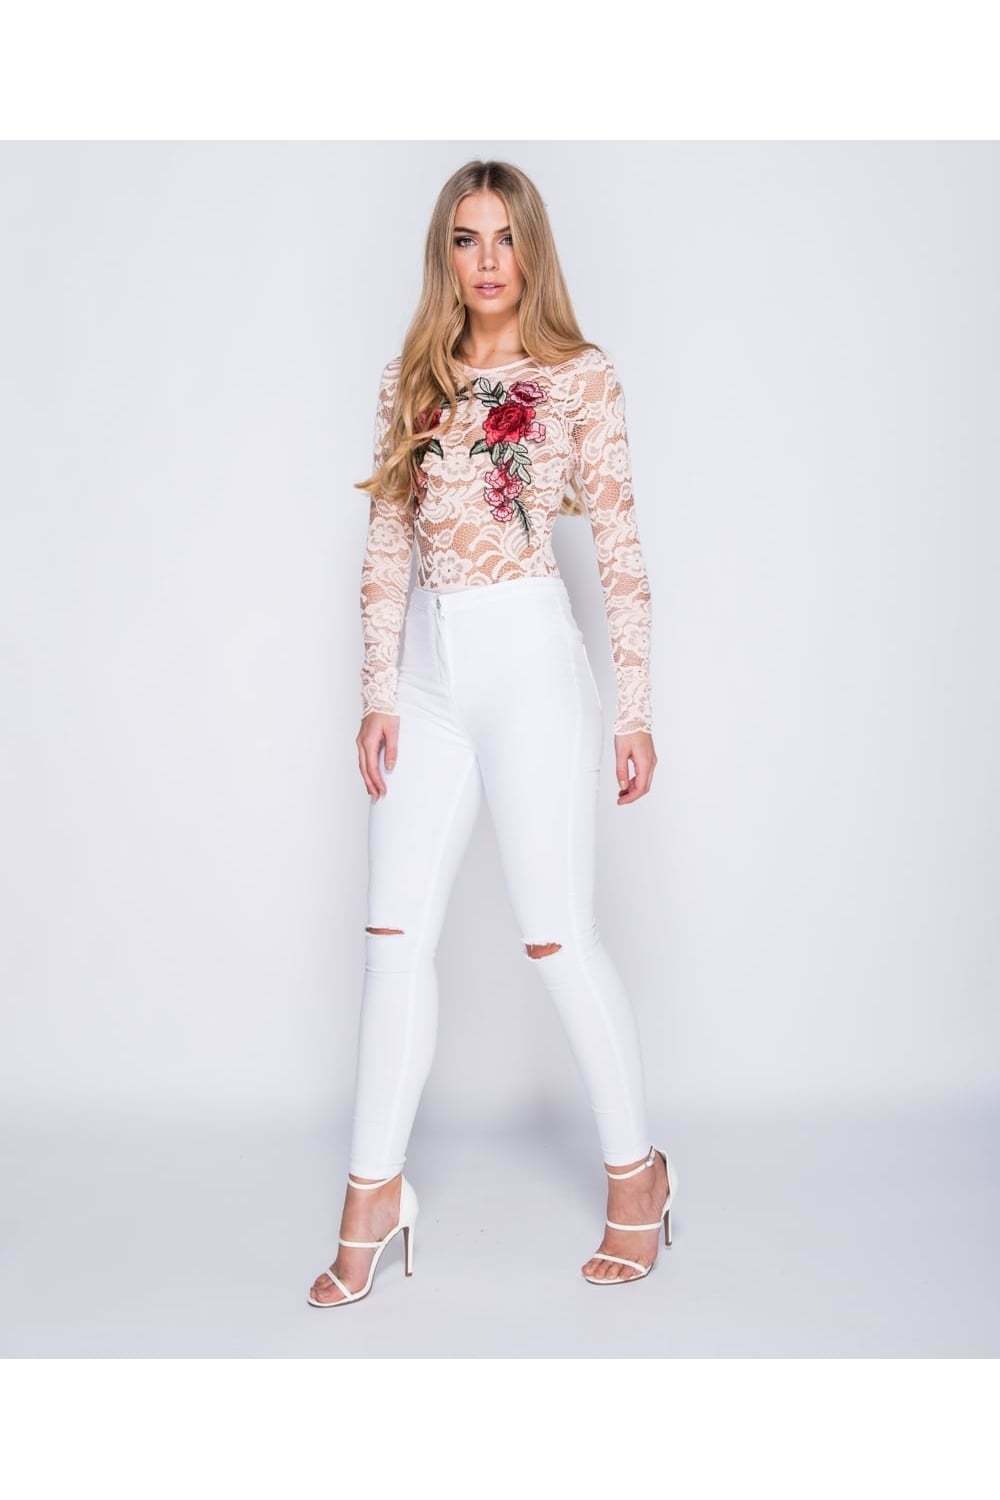 Flower Patch Embroidered Lace Long Sleeve Bodysuit